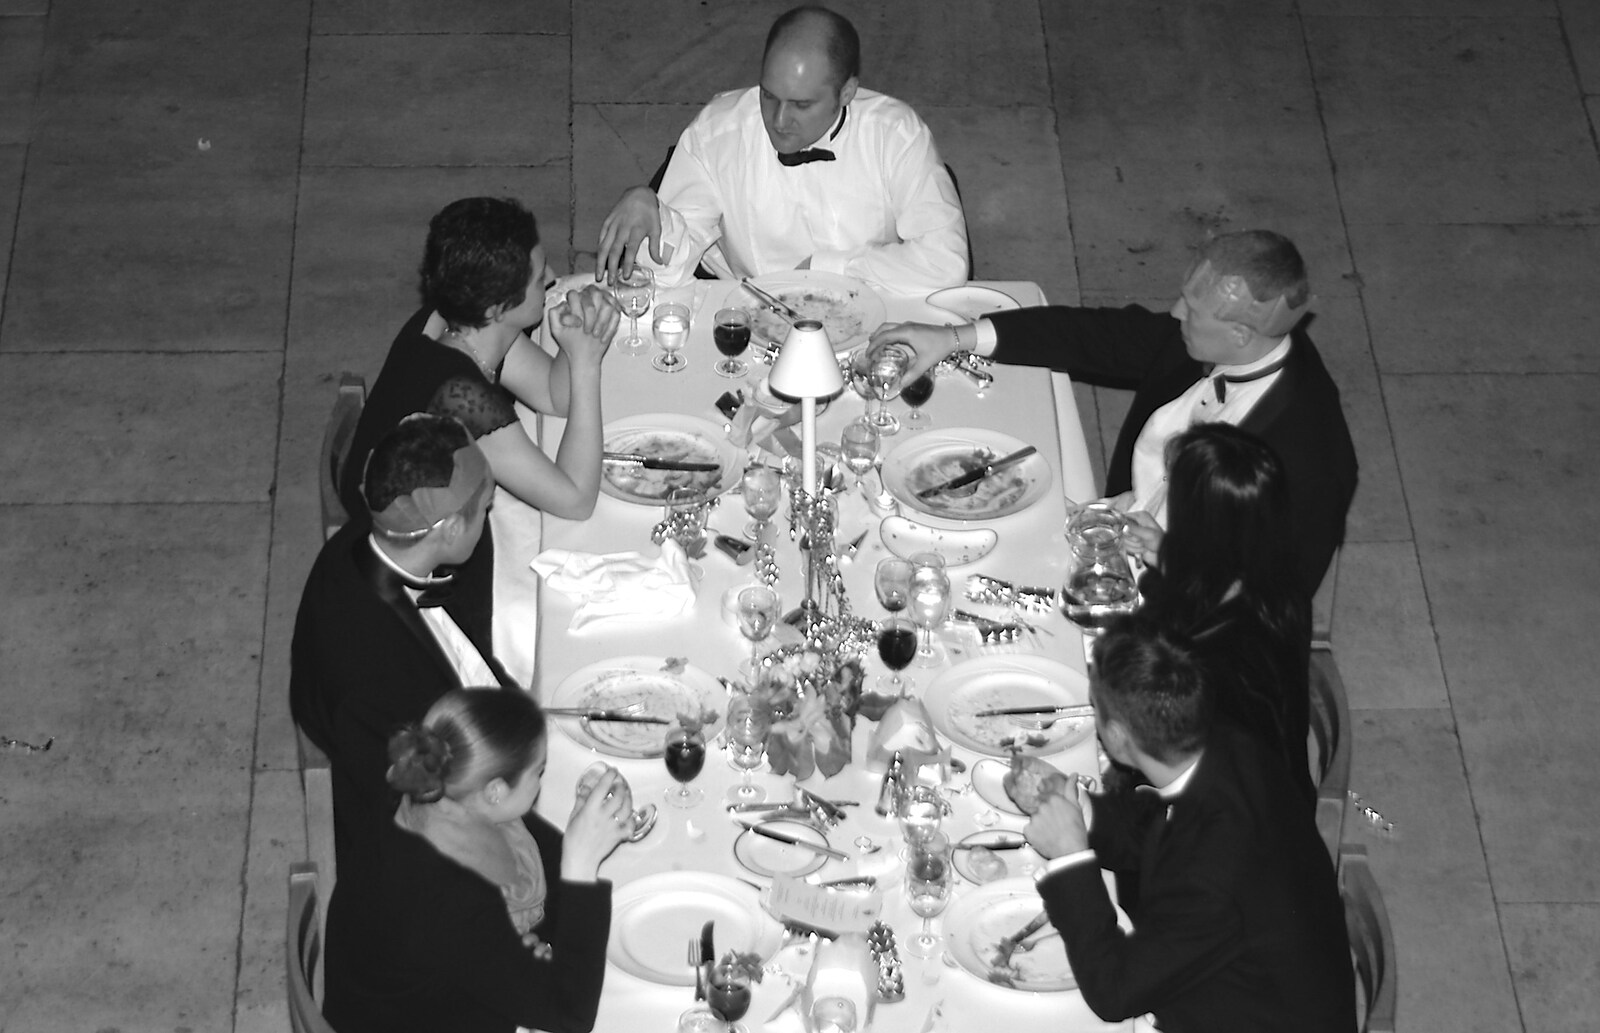 F-dudes's table from Qualcomm Cambridge's Christmas Do, King's College, Cambridge - 22nd December 2004